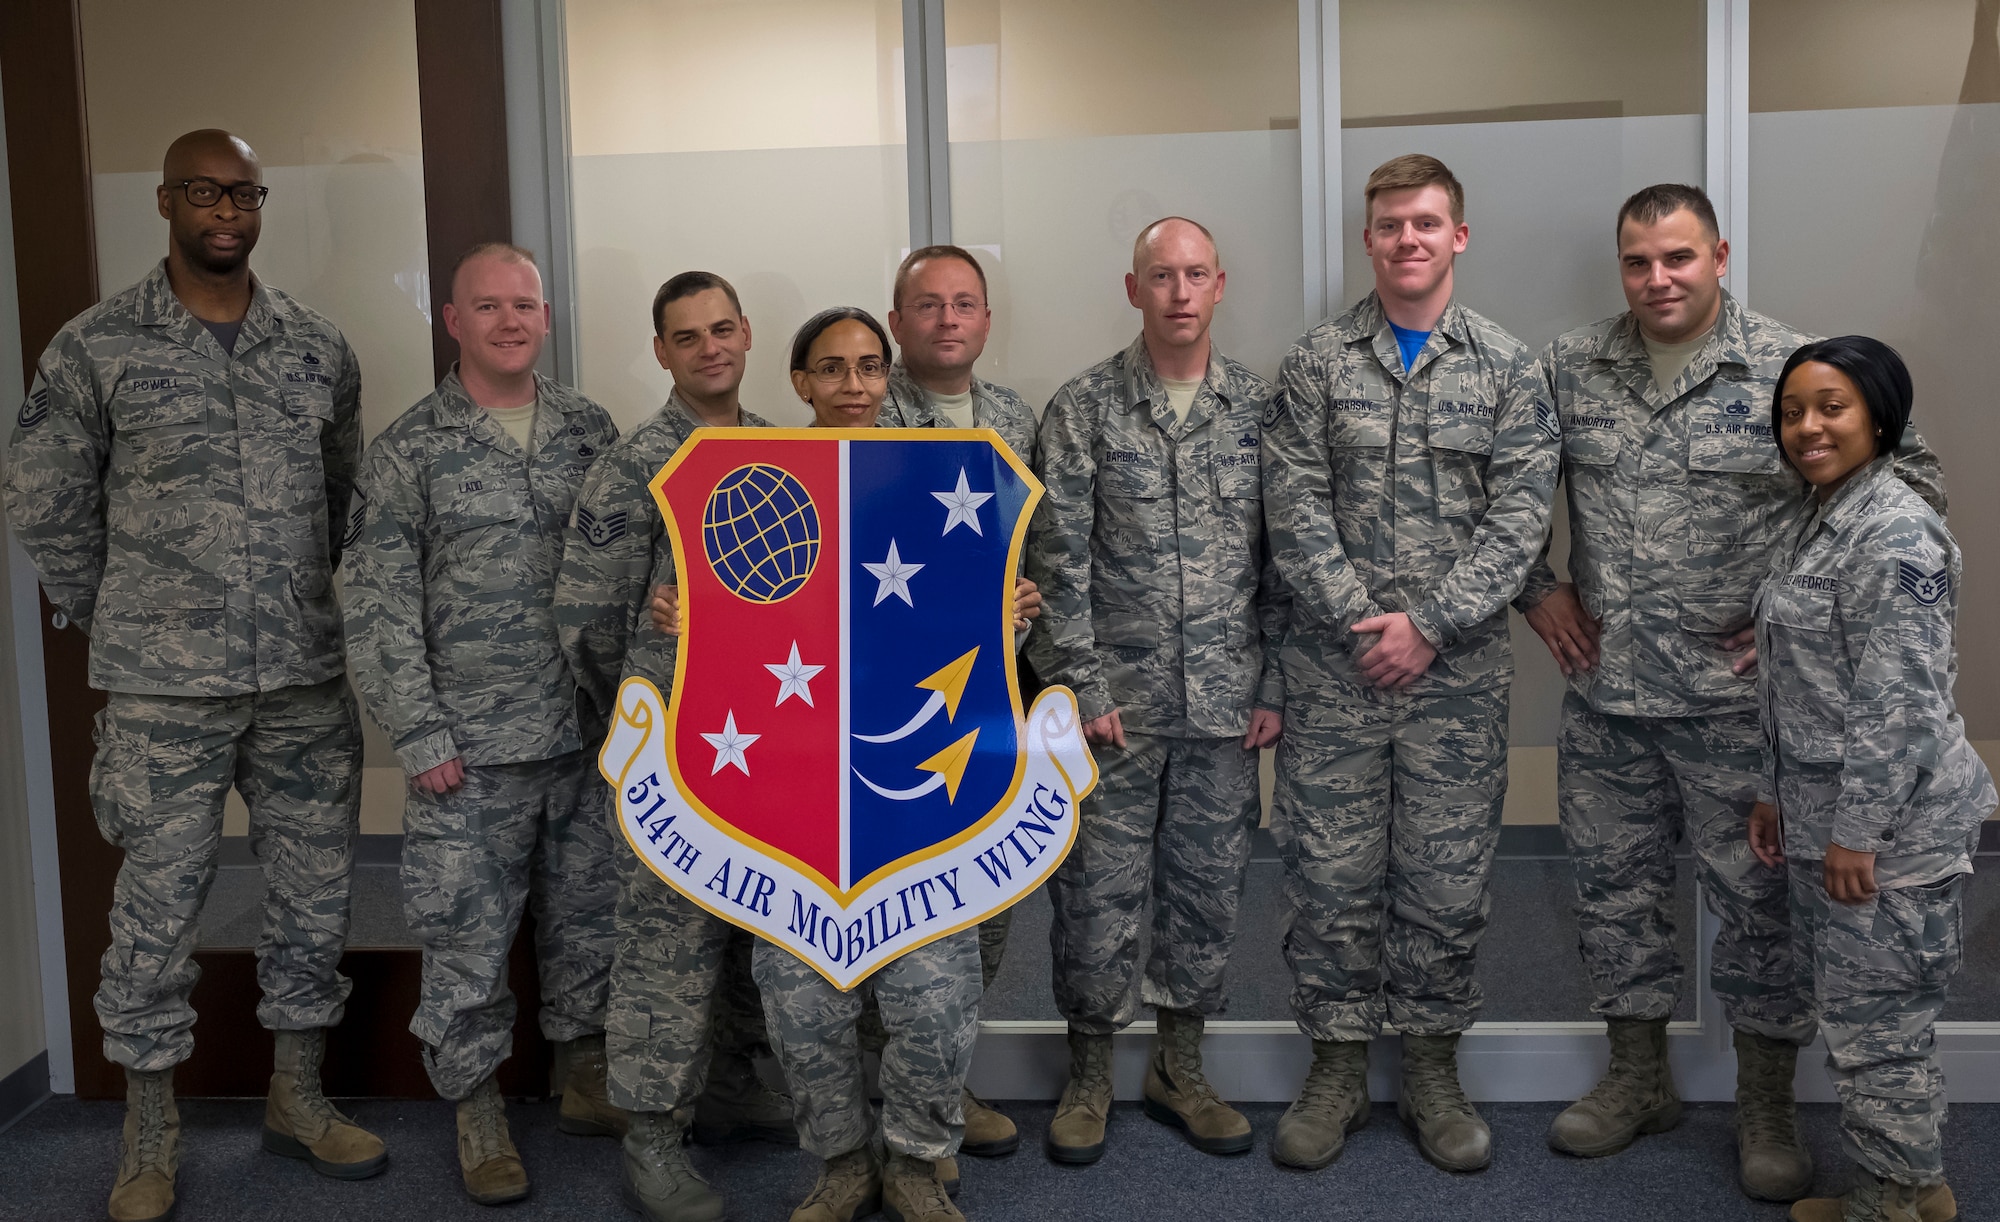 Unit Safety Representatives and Reserve Citizen Airmen from the 514th Air Mobility Wing received Occupational Safety and Health Administration training, August 6, 2018.